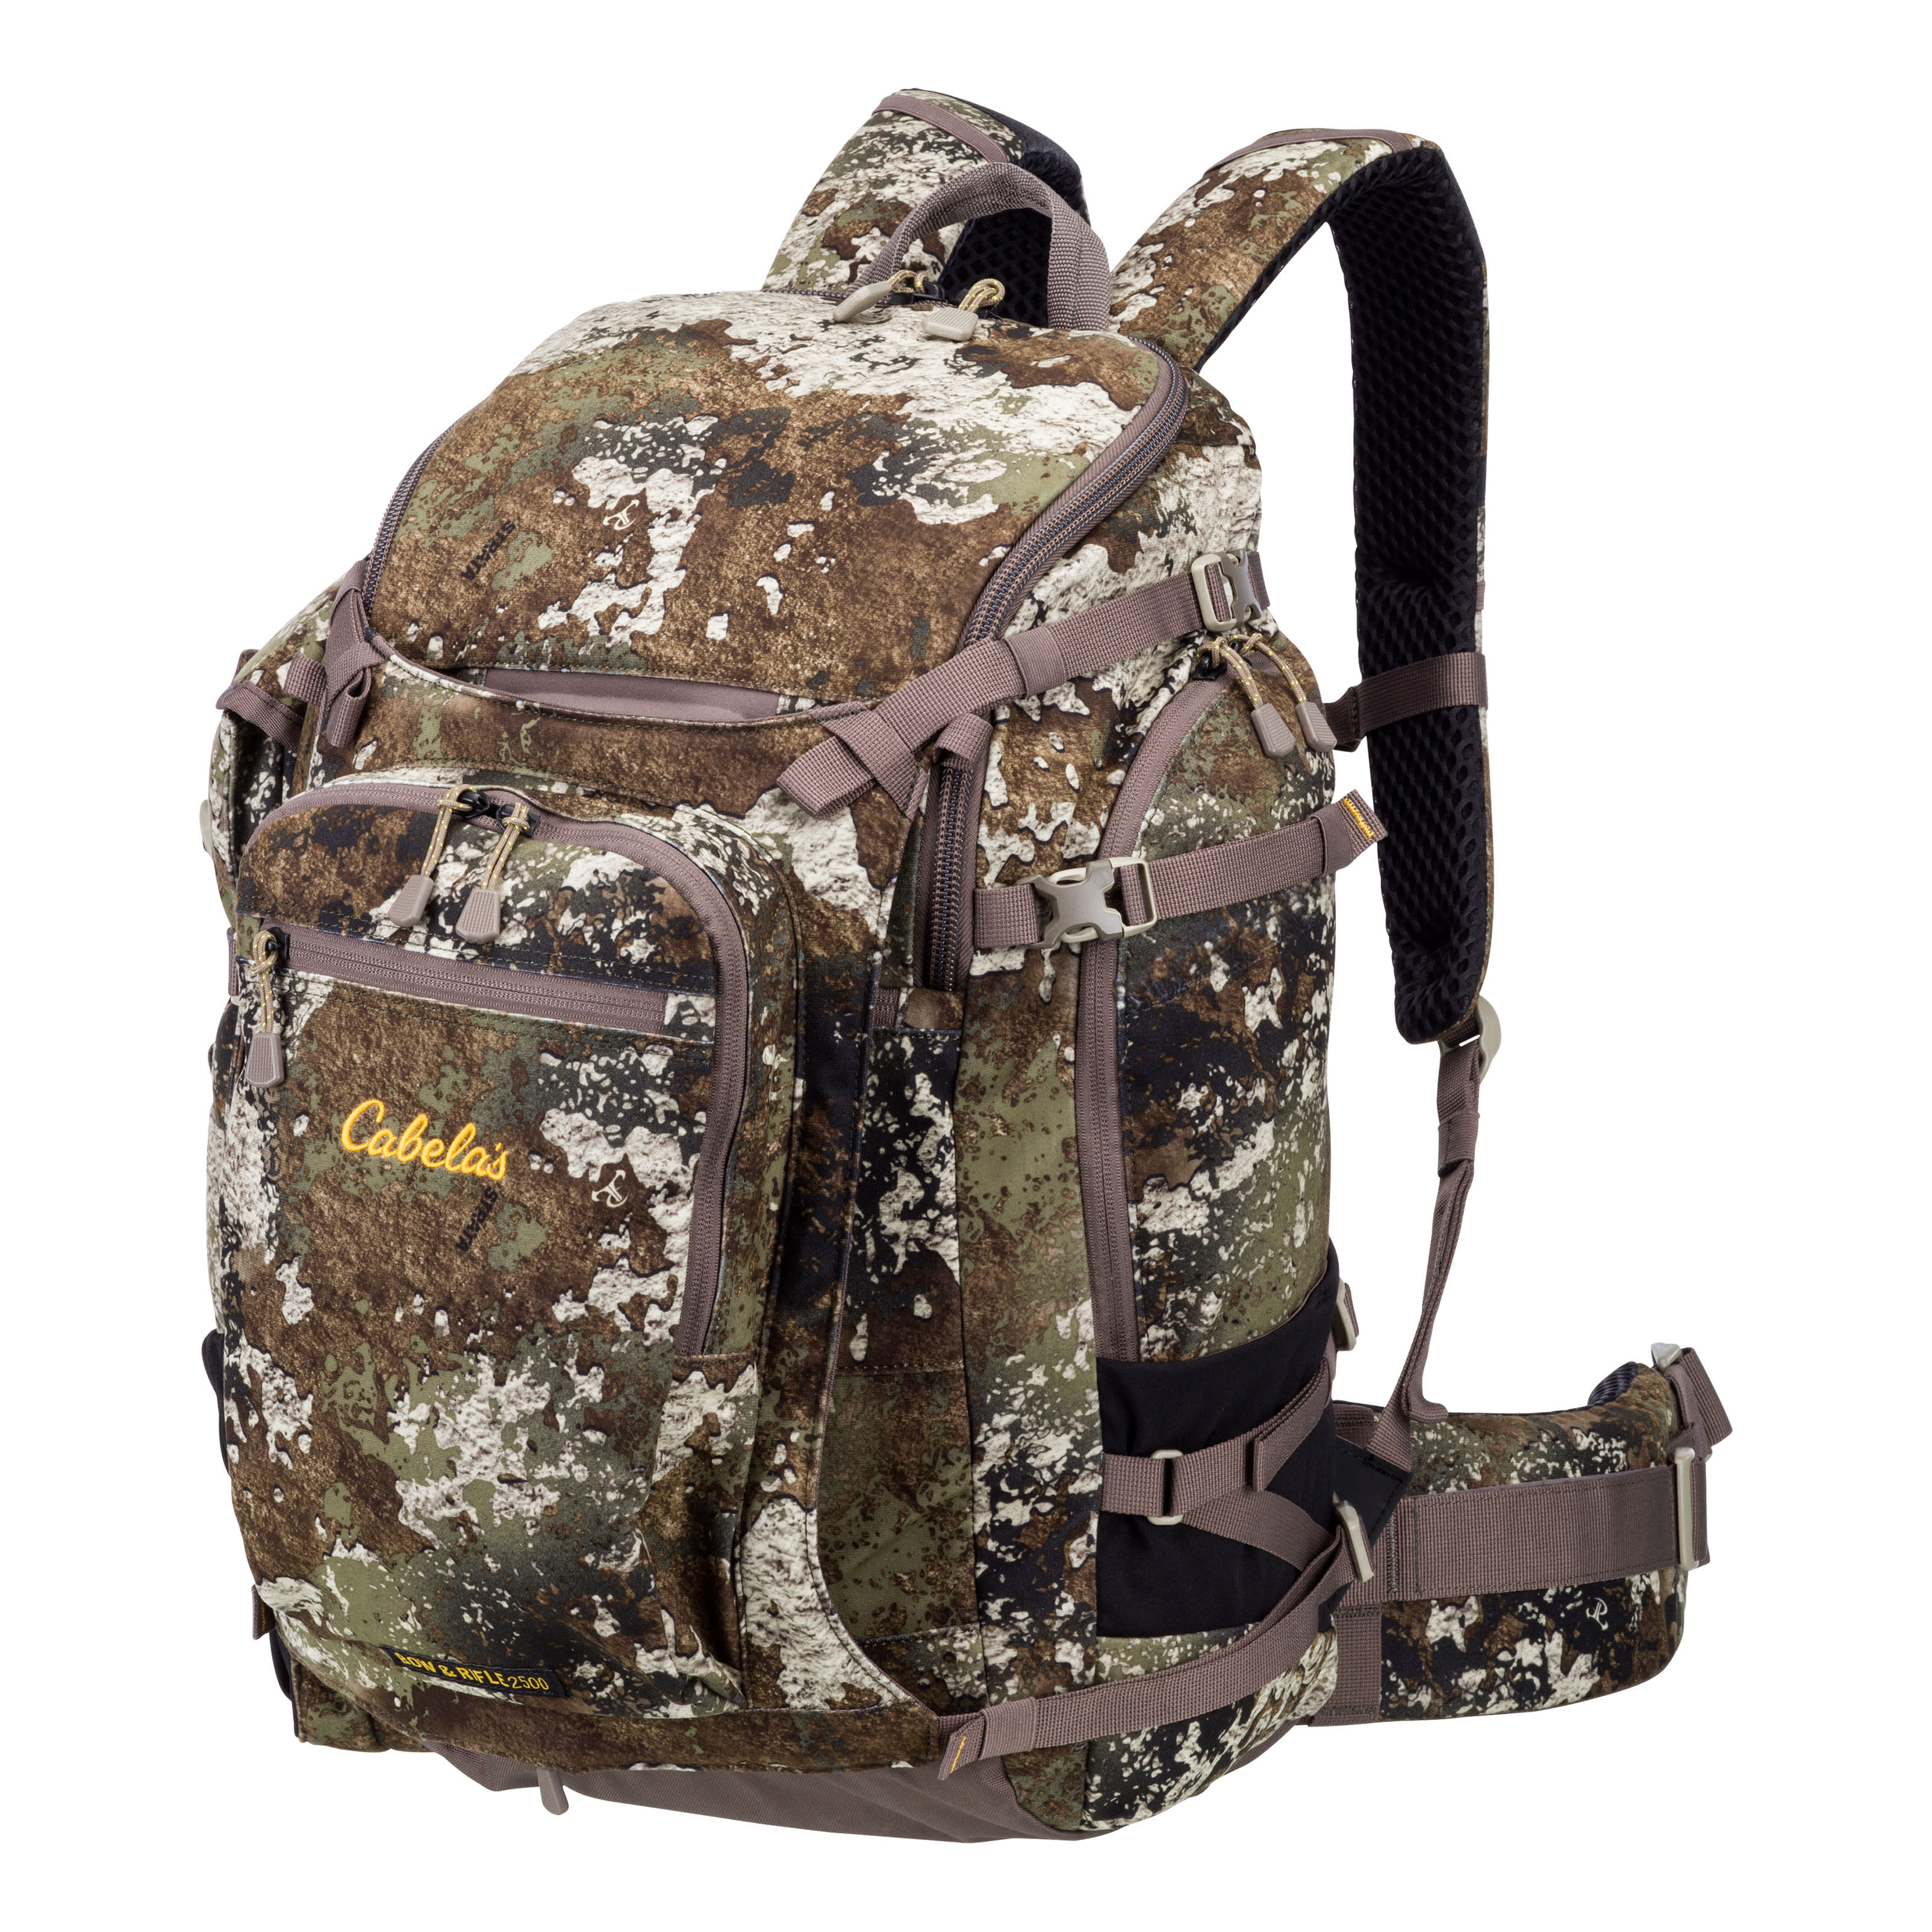 Cabela’s Bow and Rifle Pack - Cabelas - CABELA'S - Hunting Packs